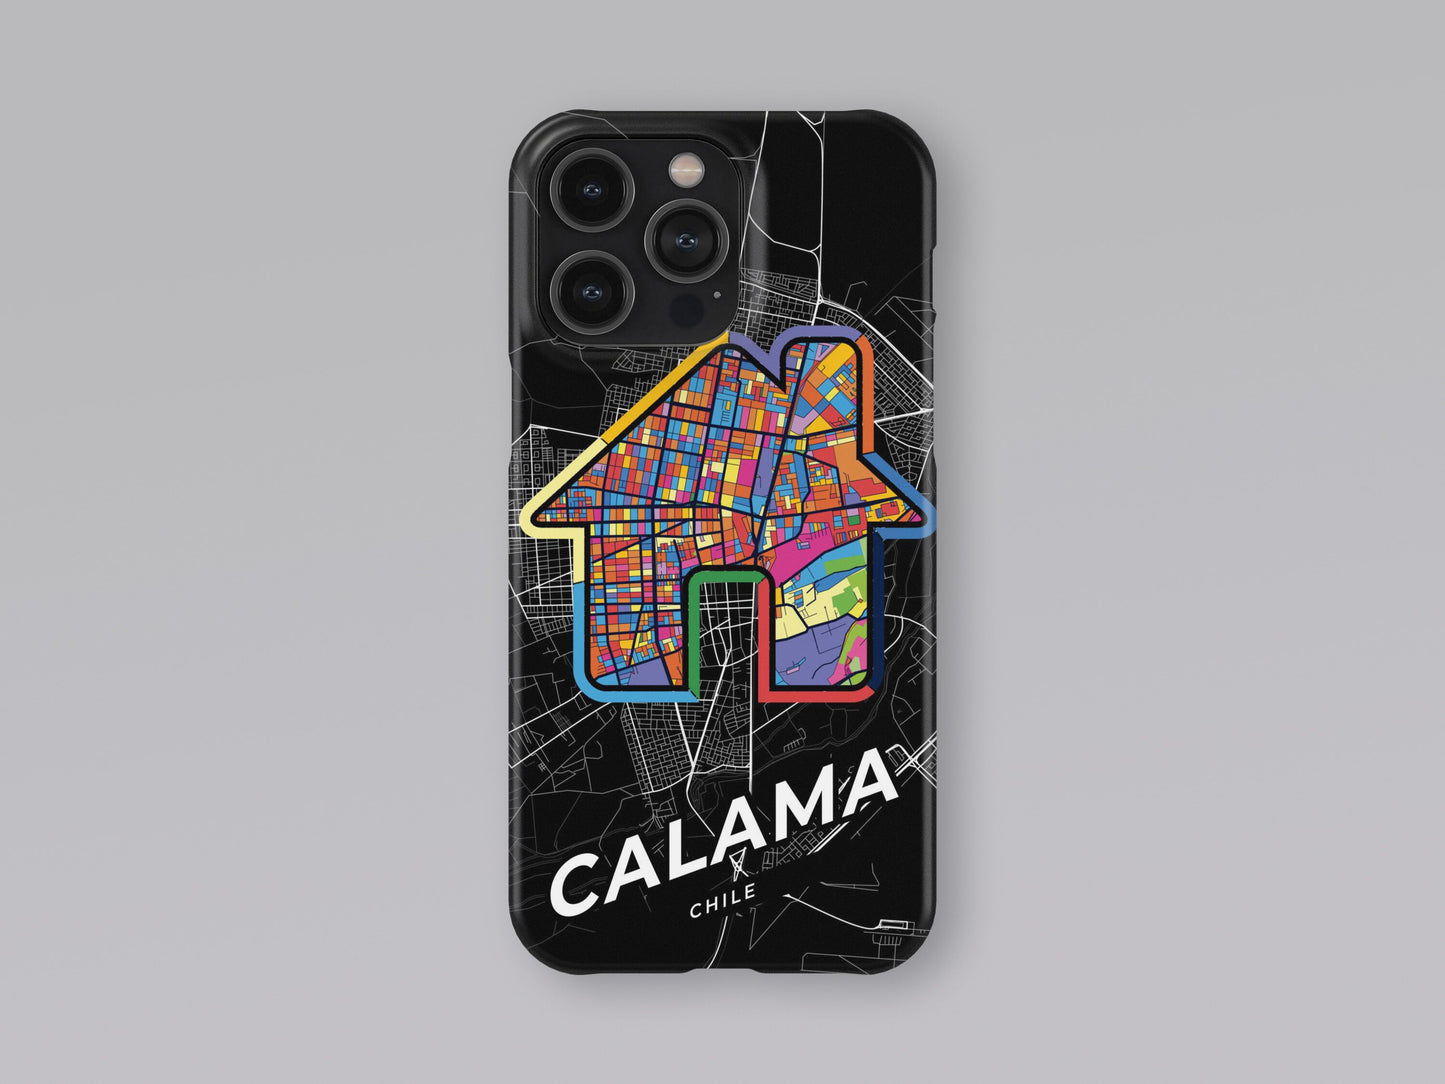 Calama Chile slim phone case with colorful icon. Birthday, wedding or housewarming gift. Couple match cases. 3